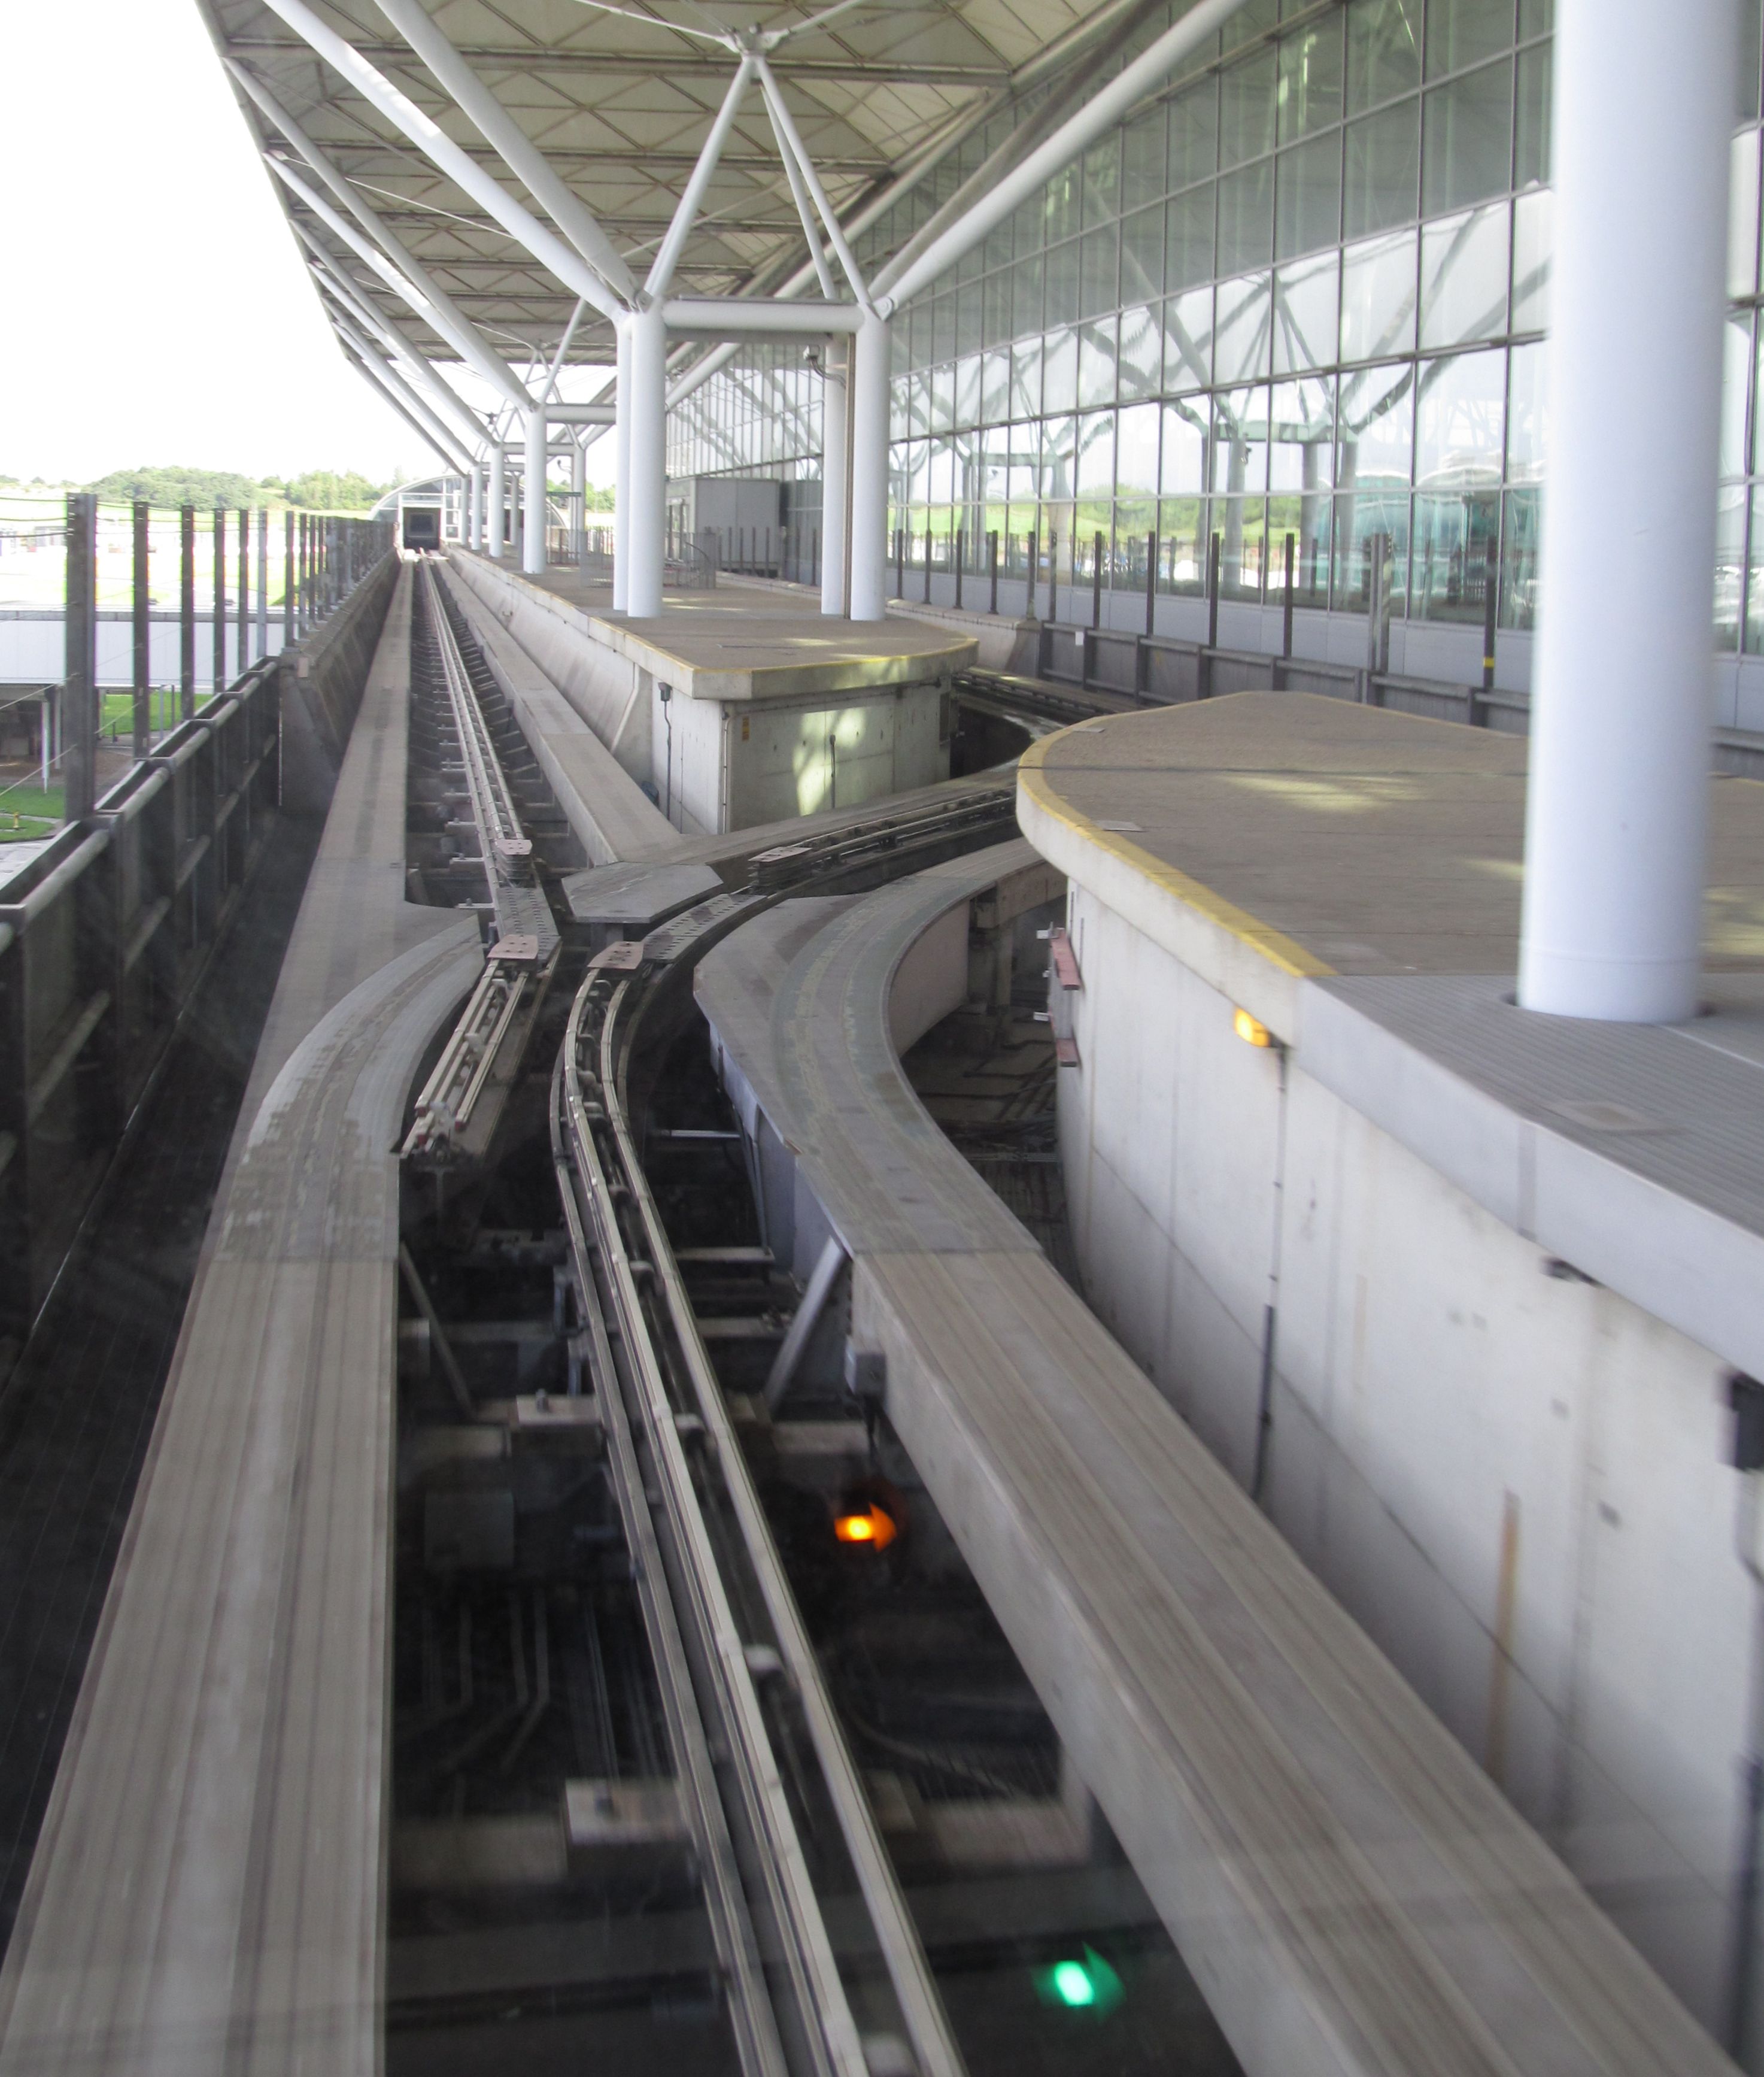 File:Stansted Airport Transit System switch.JPG - Wikipedia